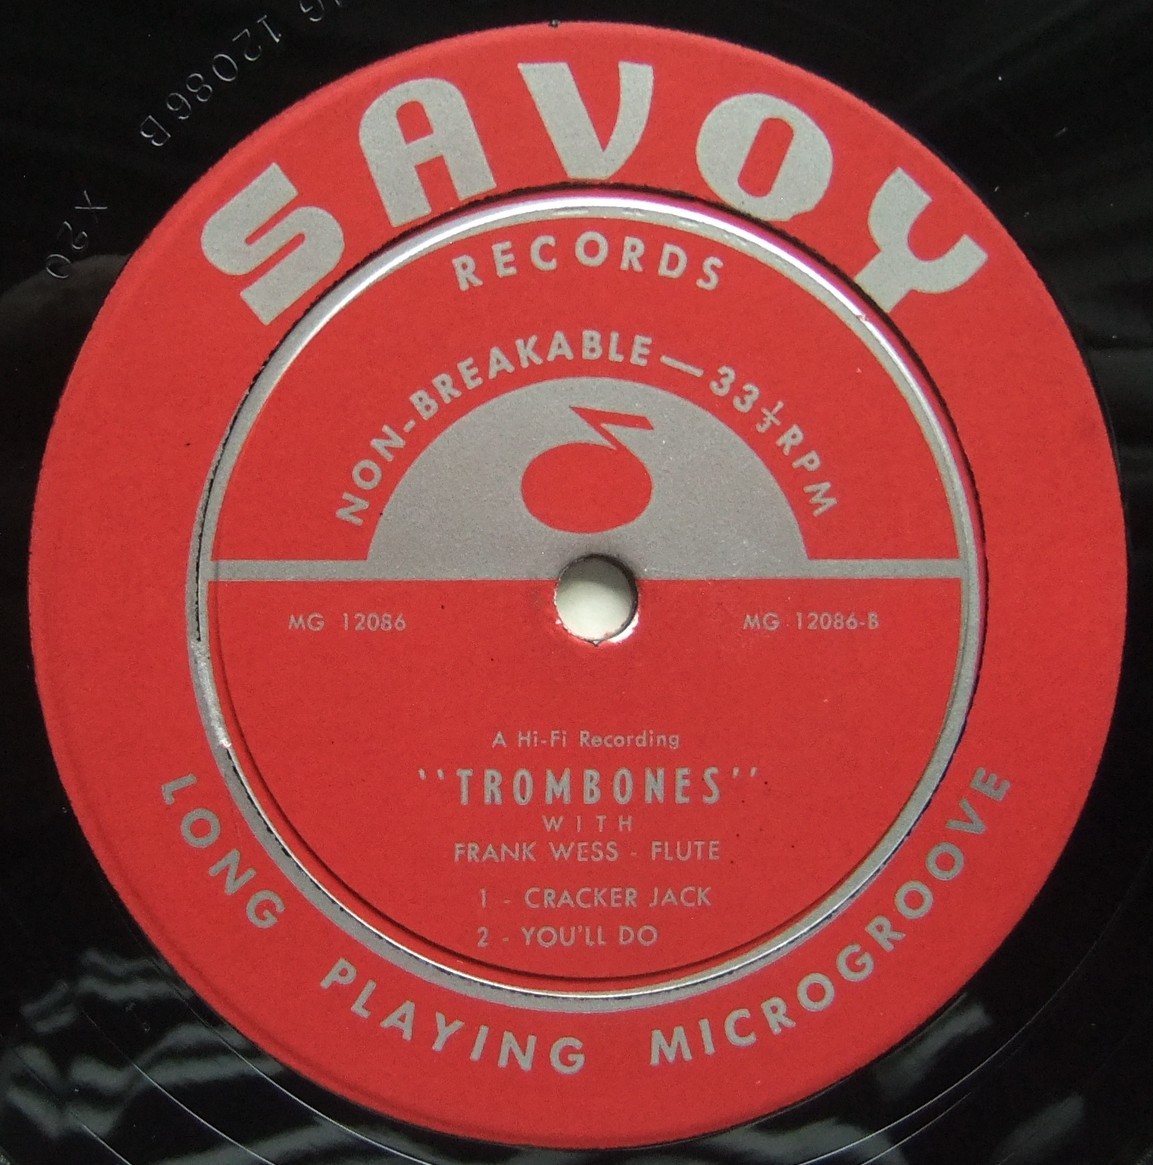 ◆ TROMBONES featuring FRANK WESS Flute ◆ Savoy MG 12086 (red:RVG:dg) ◆ W_画像4